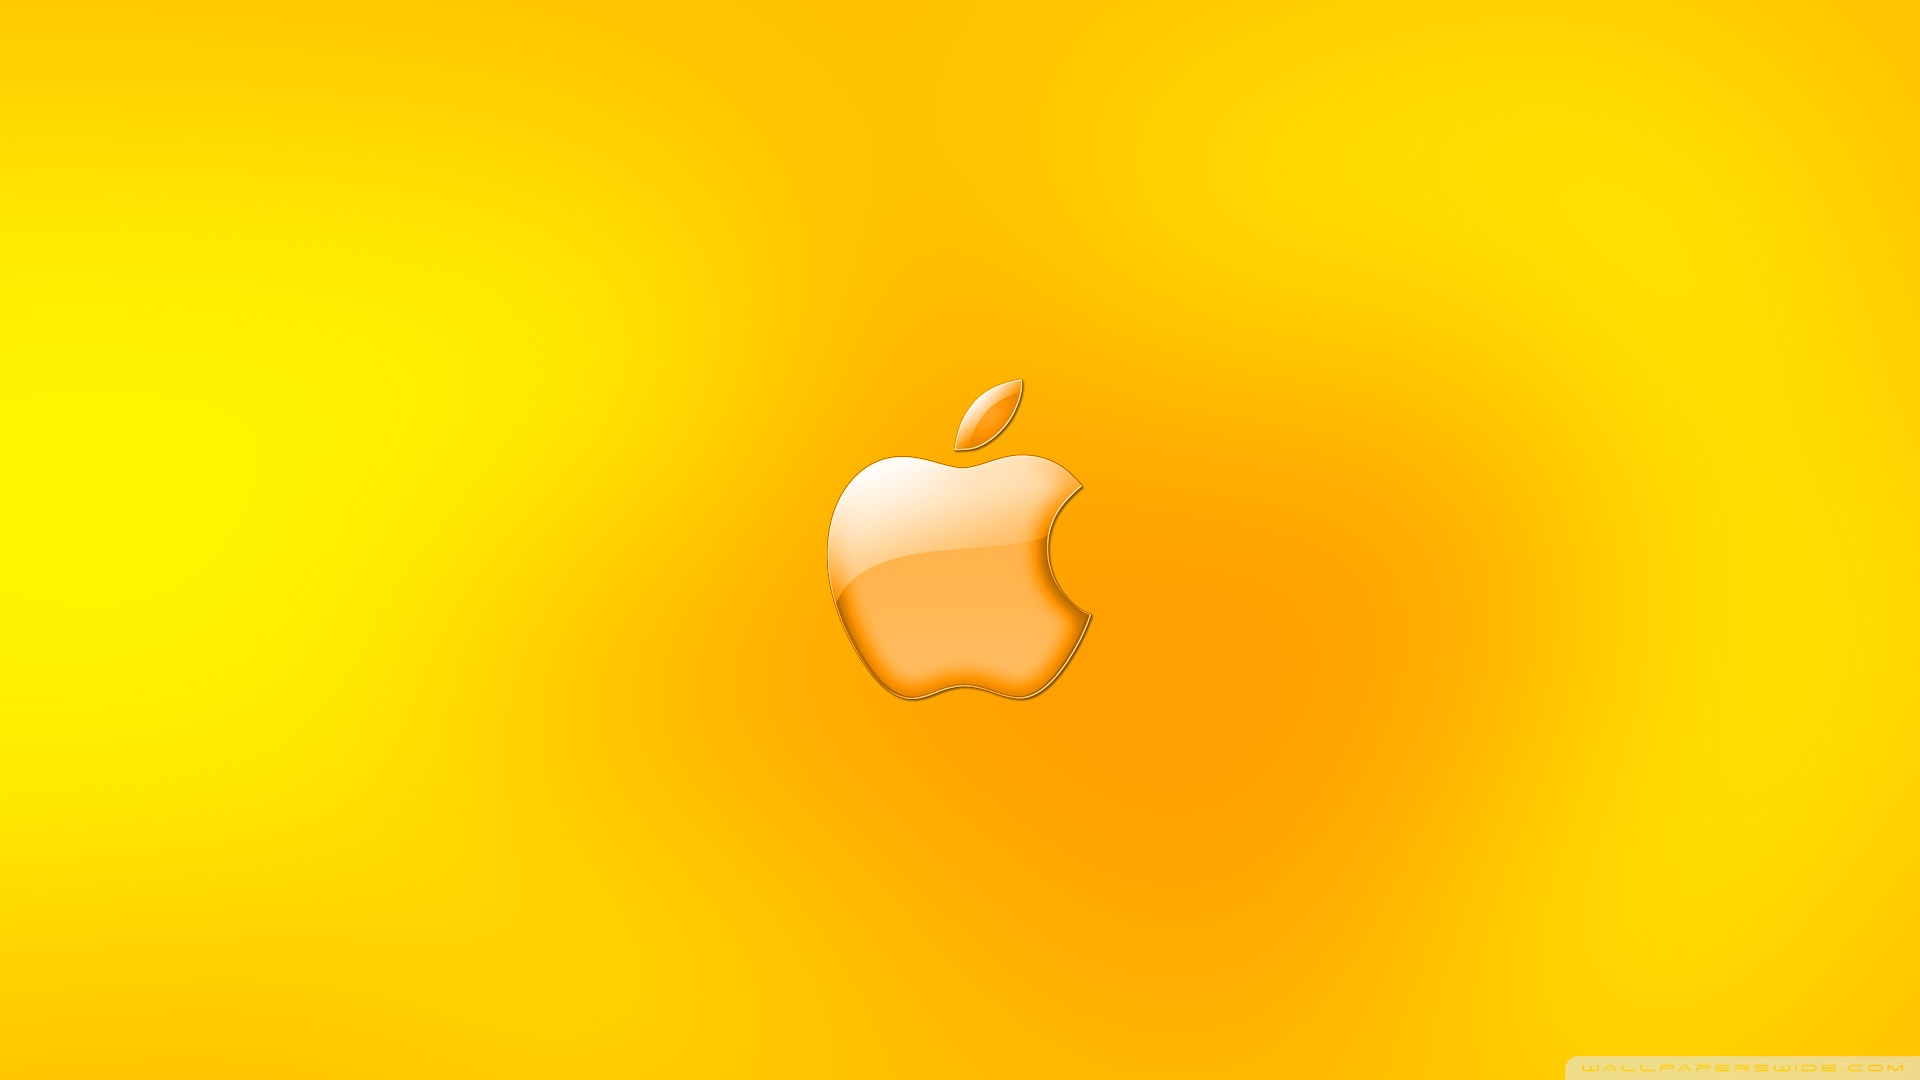 apple gold logo wallpapers wallpaper images 1920x1080